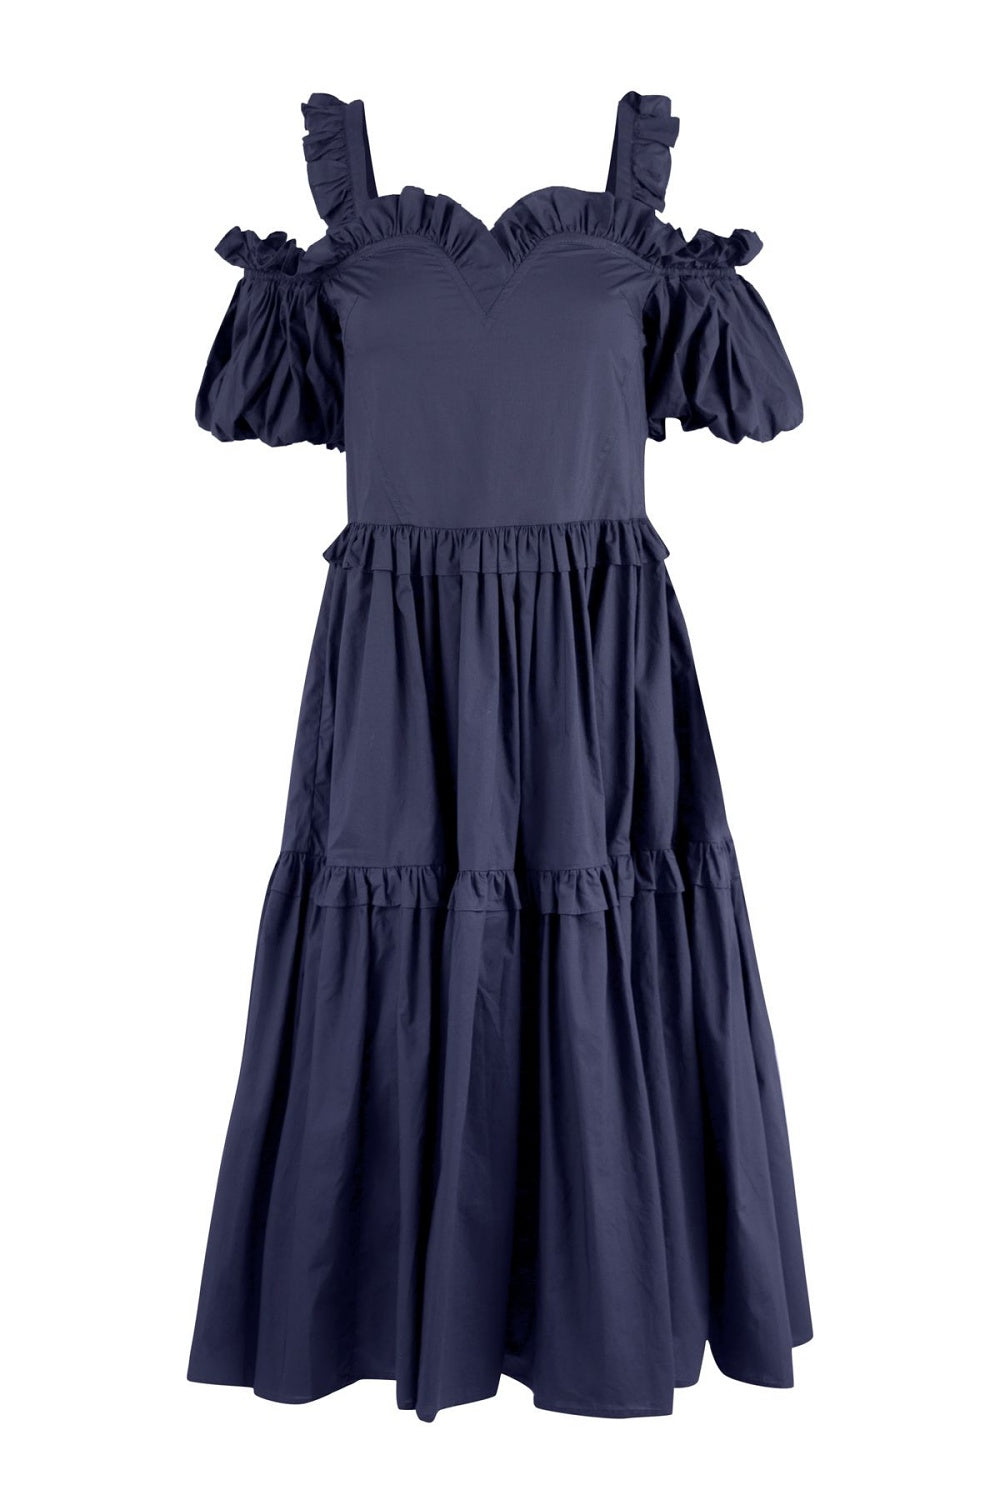 SWEETHEARTS FOREVER DRESS NAVY